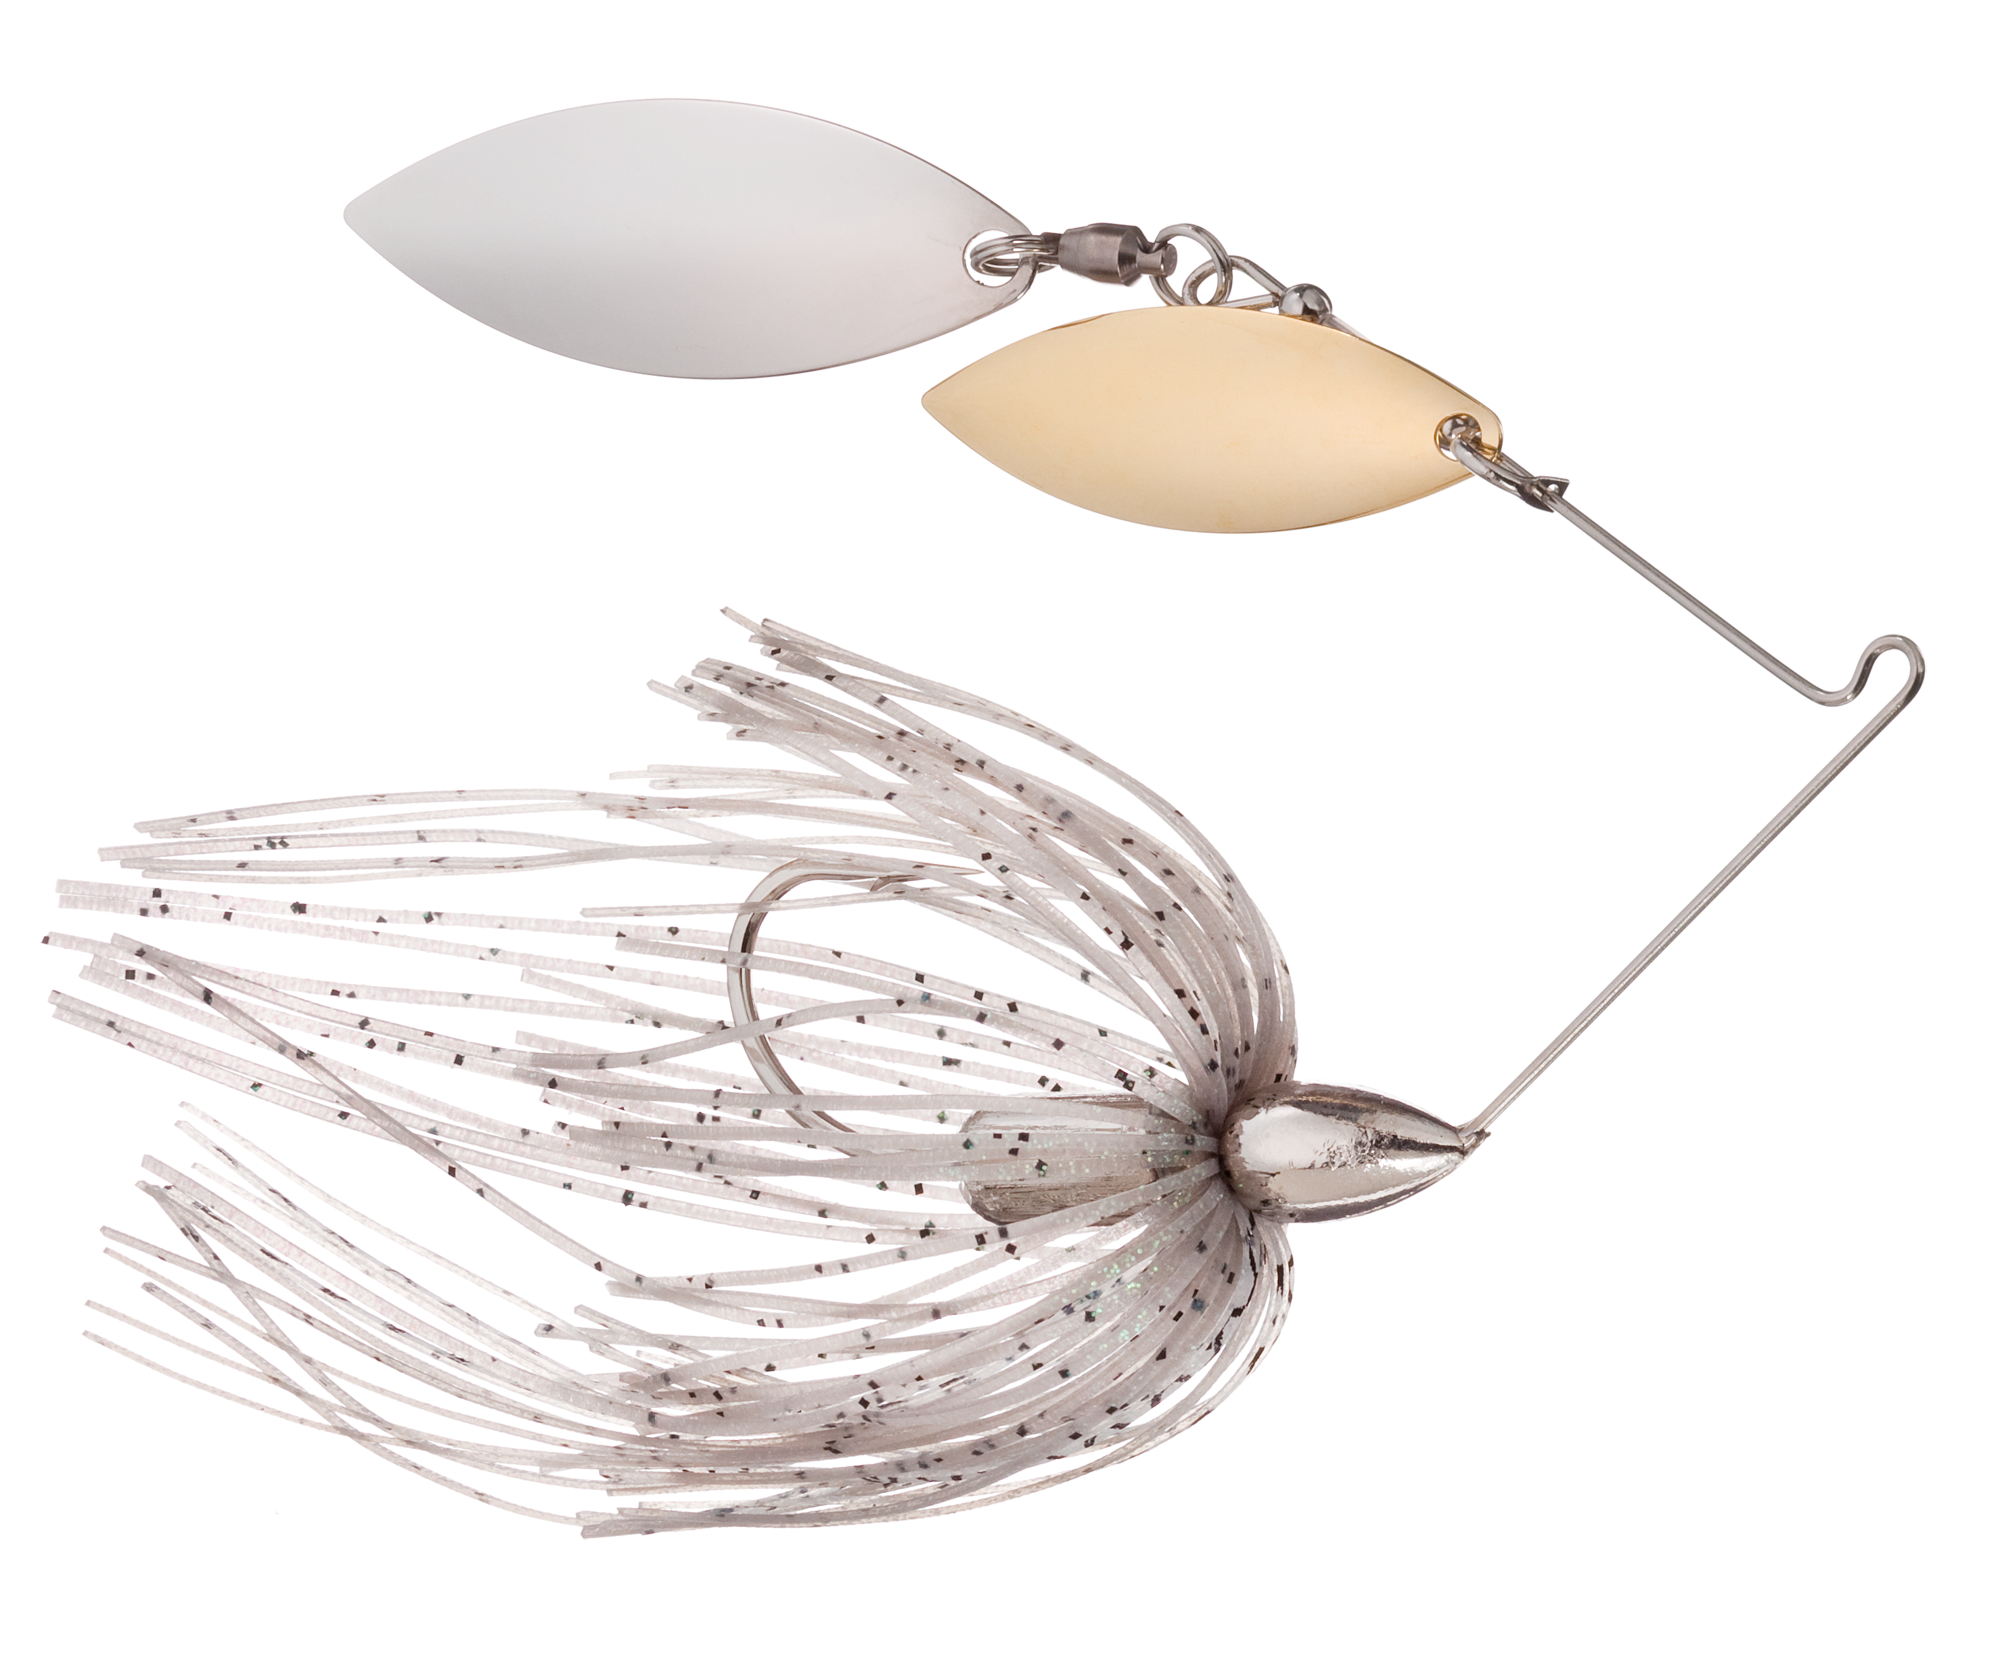 War Eagle Screamin' Eagle Double Willow Spinnerbait